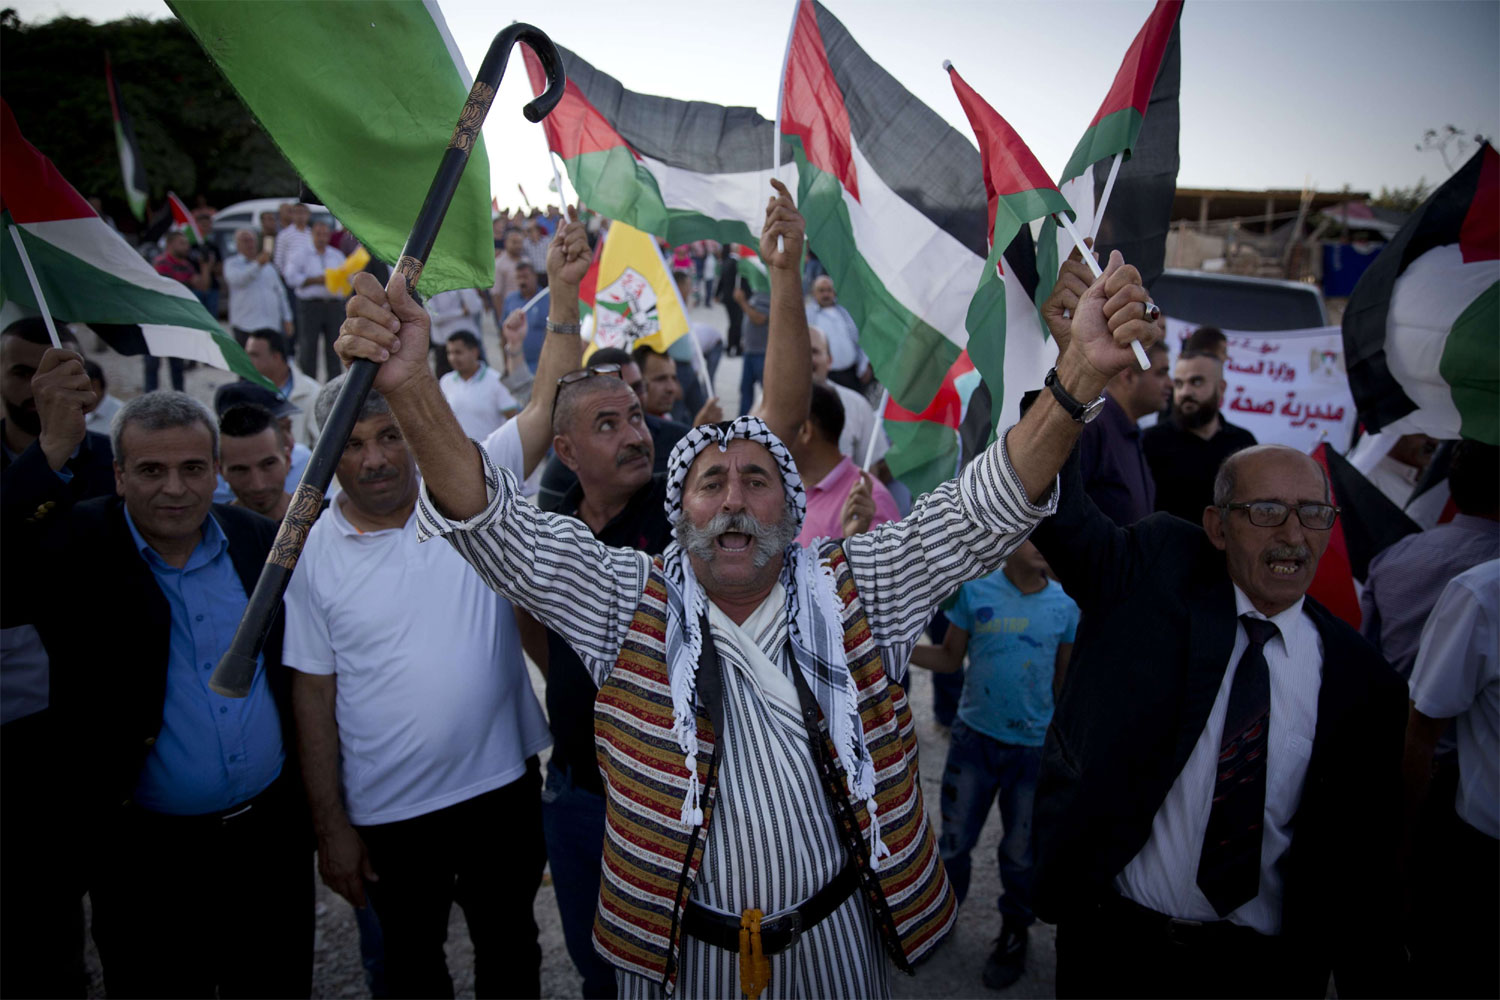 Palestinians protesters fly national flags and chant anti Israel slogans in the West Bank hamlet of Khan al-Ahmar 